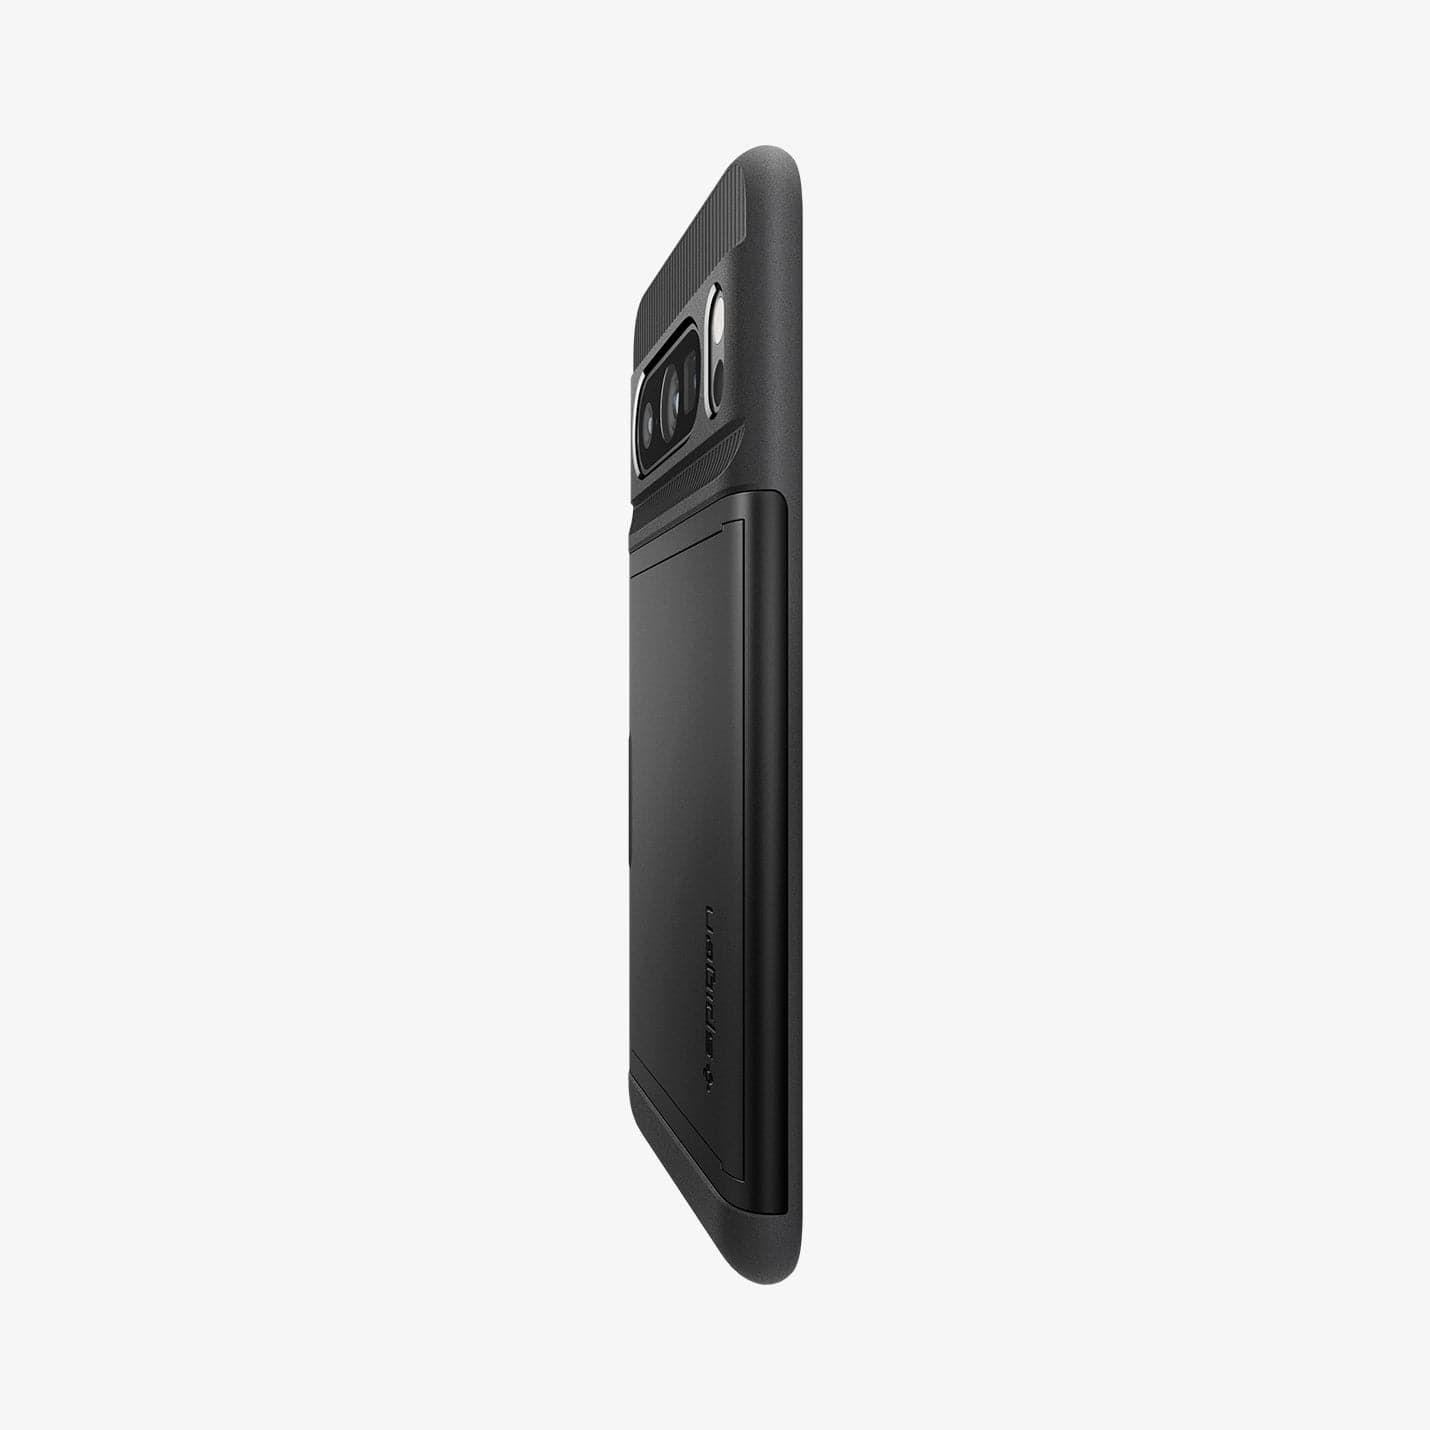 ACS06323 - Pixel 8 Pro Case Slim Armor CS in black showing the side and partial back